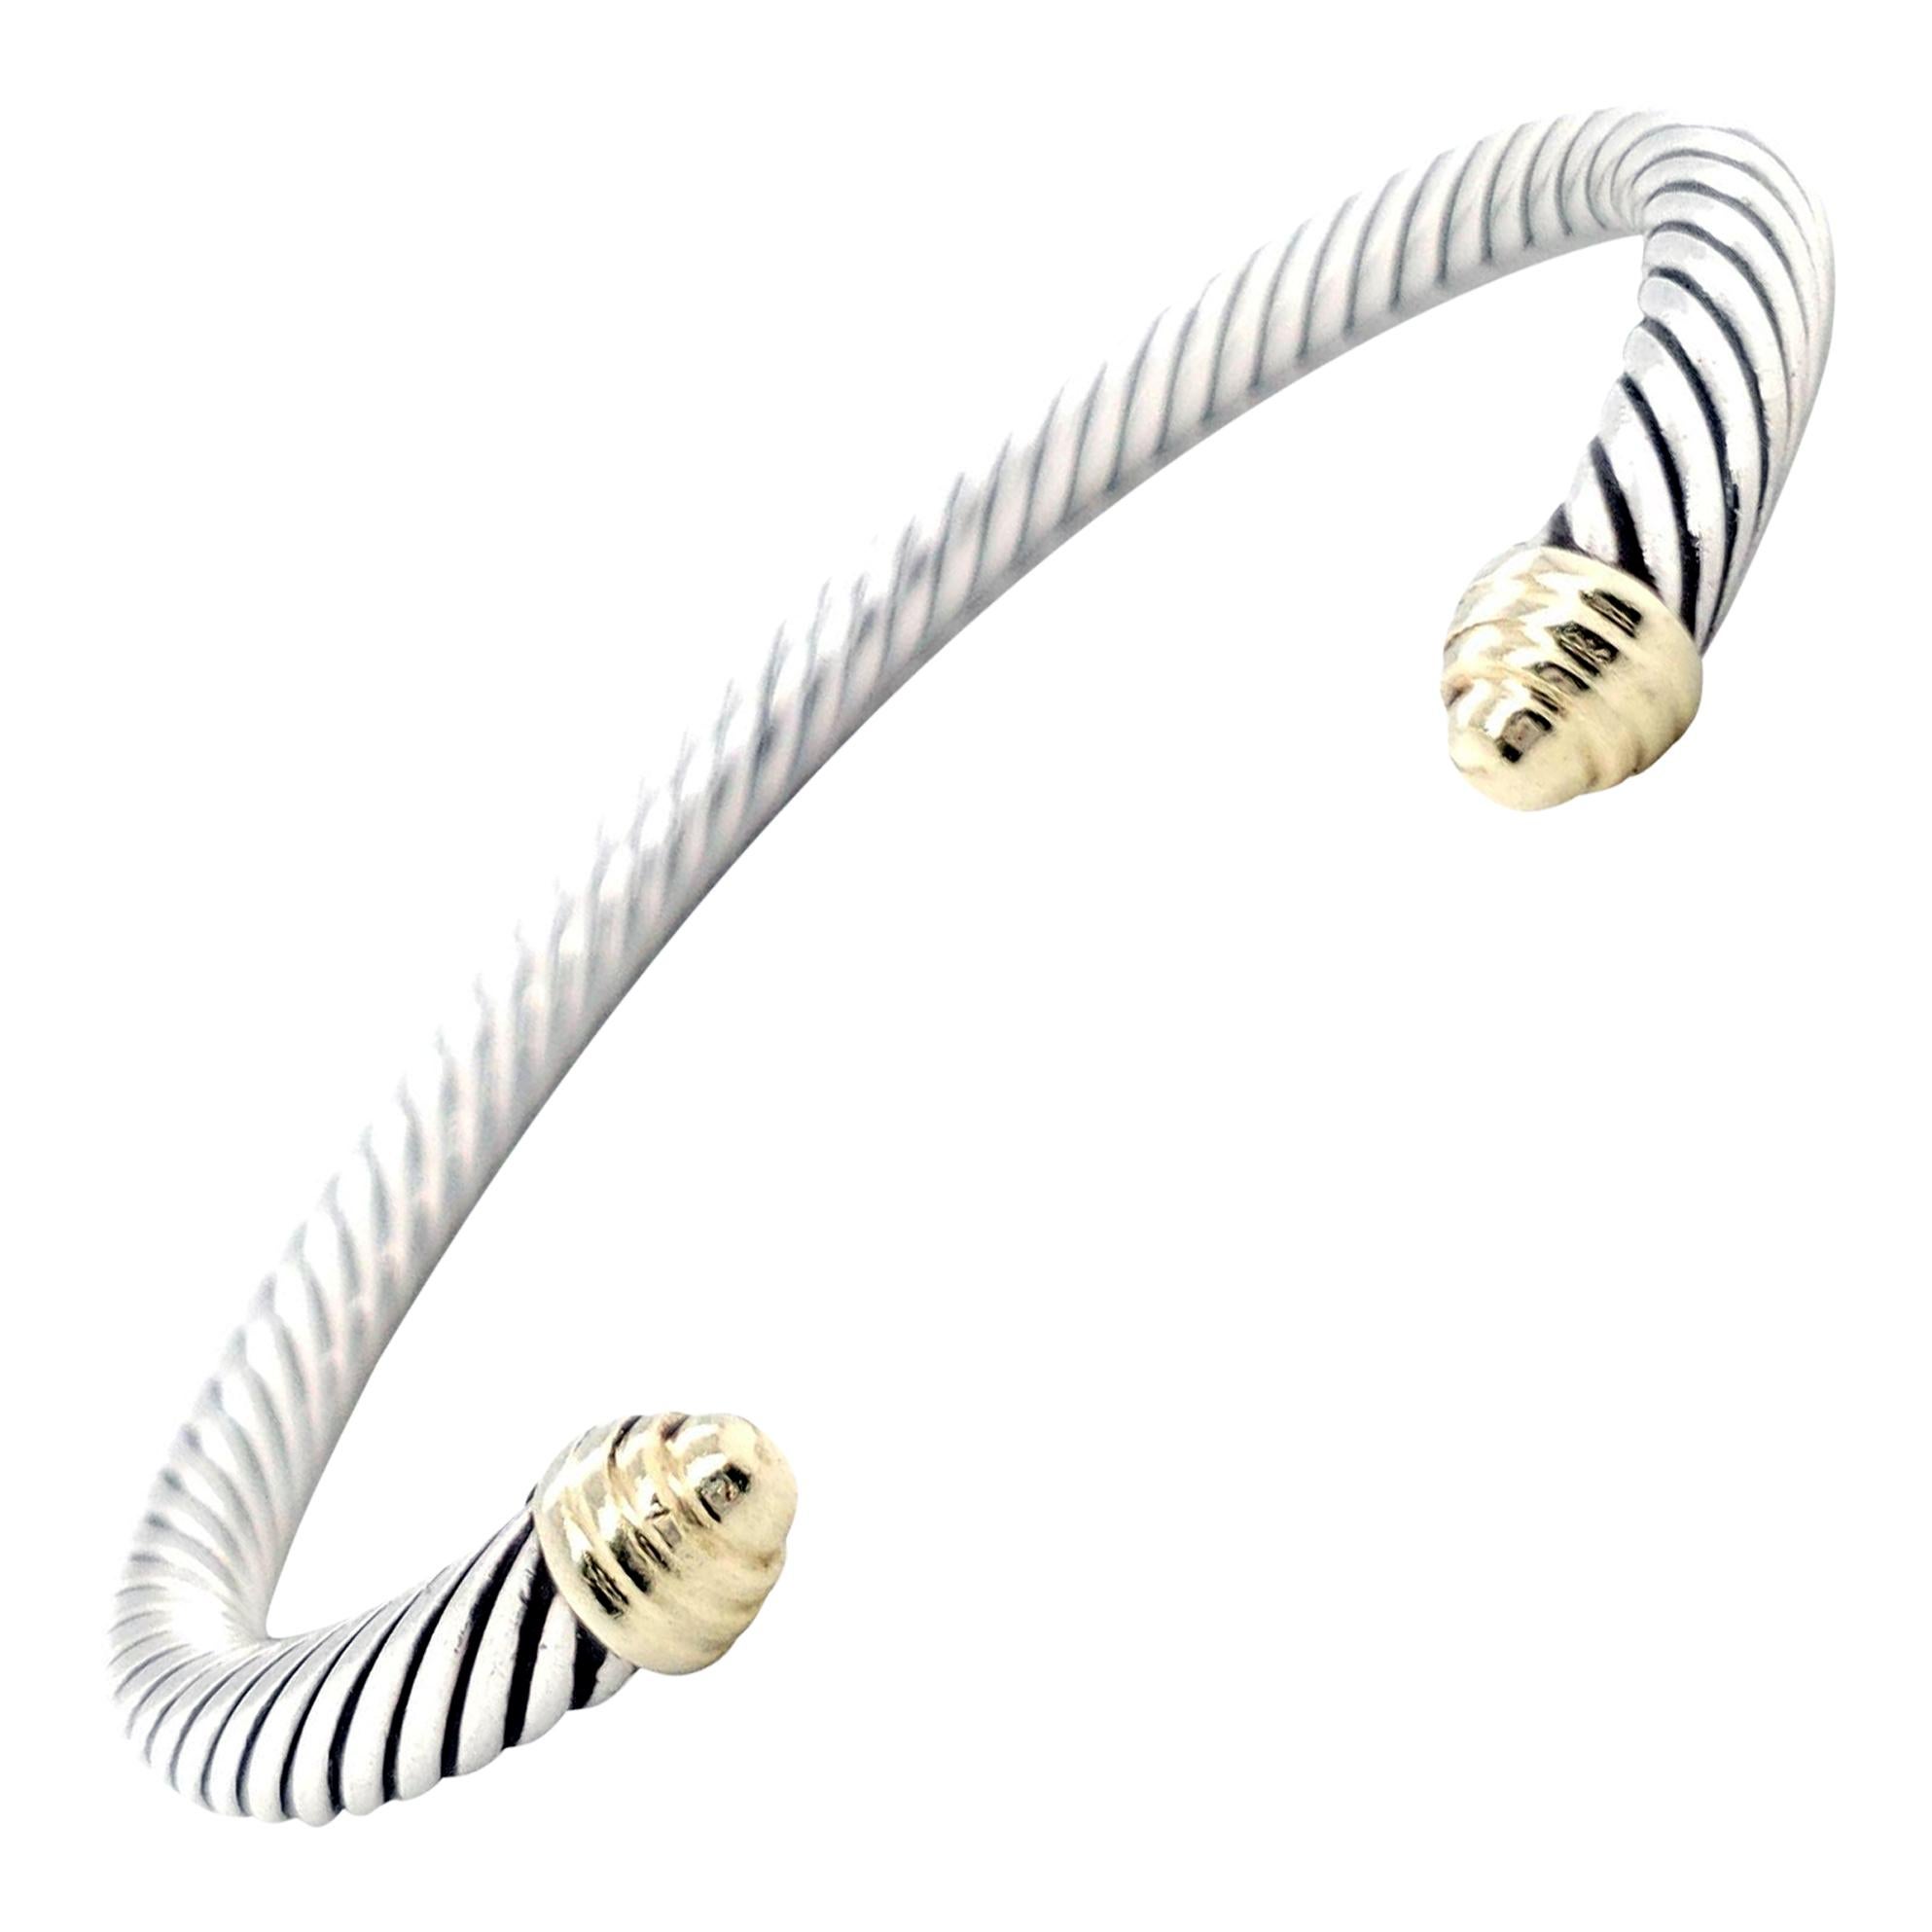 David Yurman Silver and Gold Cable Cuff Bracelet